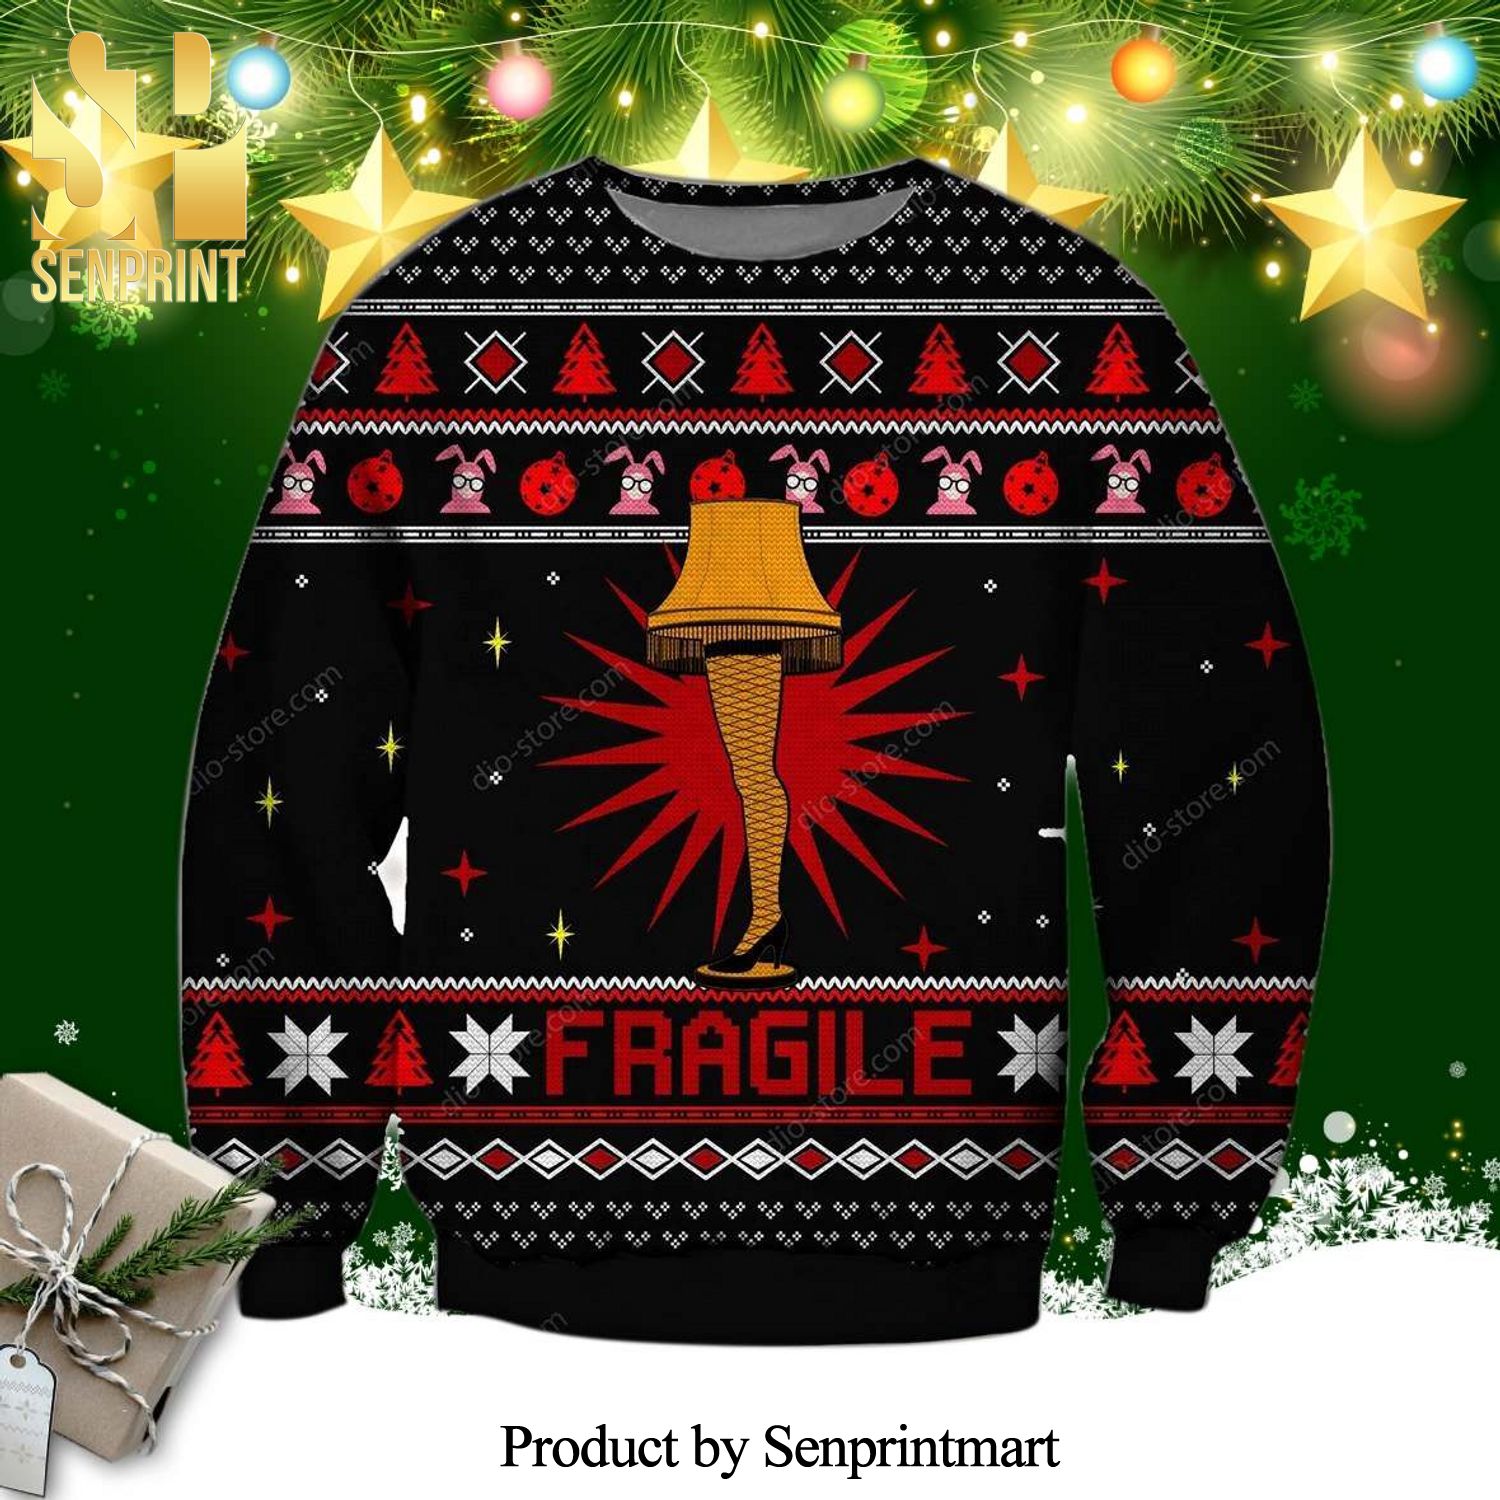 Fragile Sting Leg Lamp Knitted Ugly Christmas Sweater